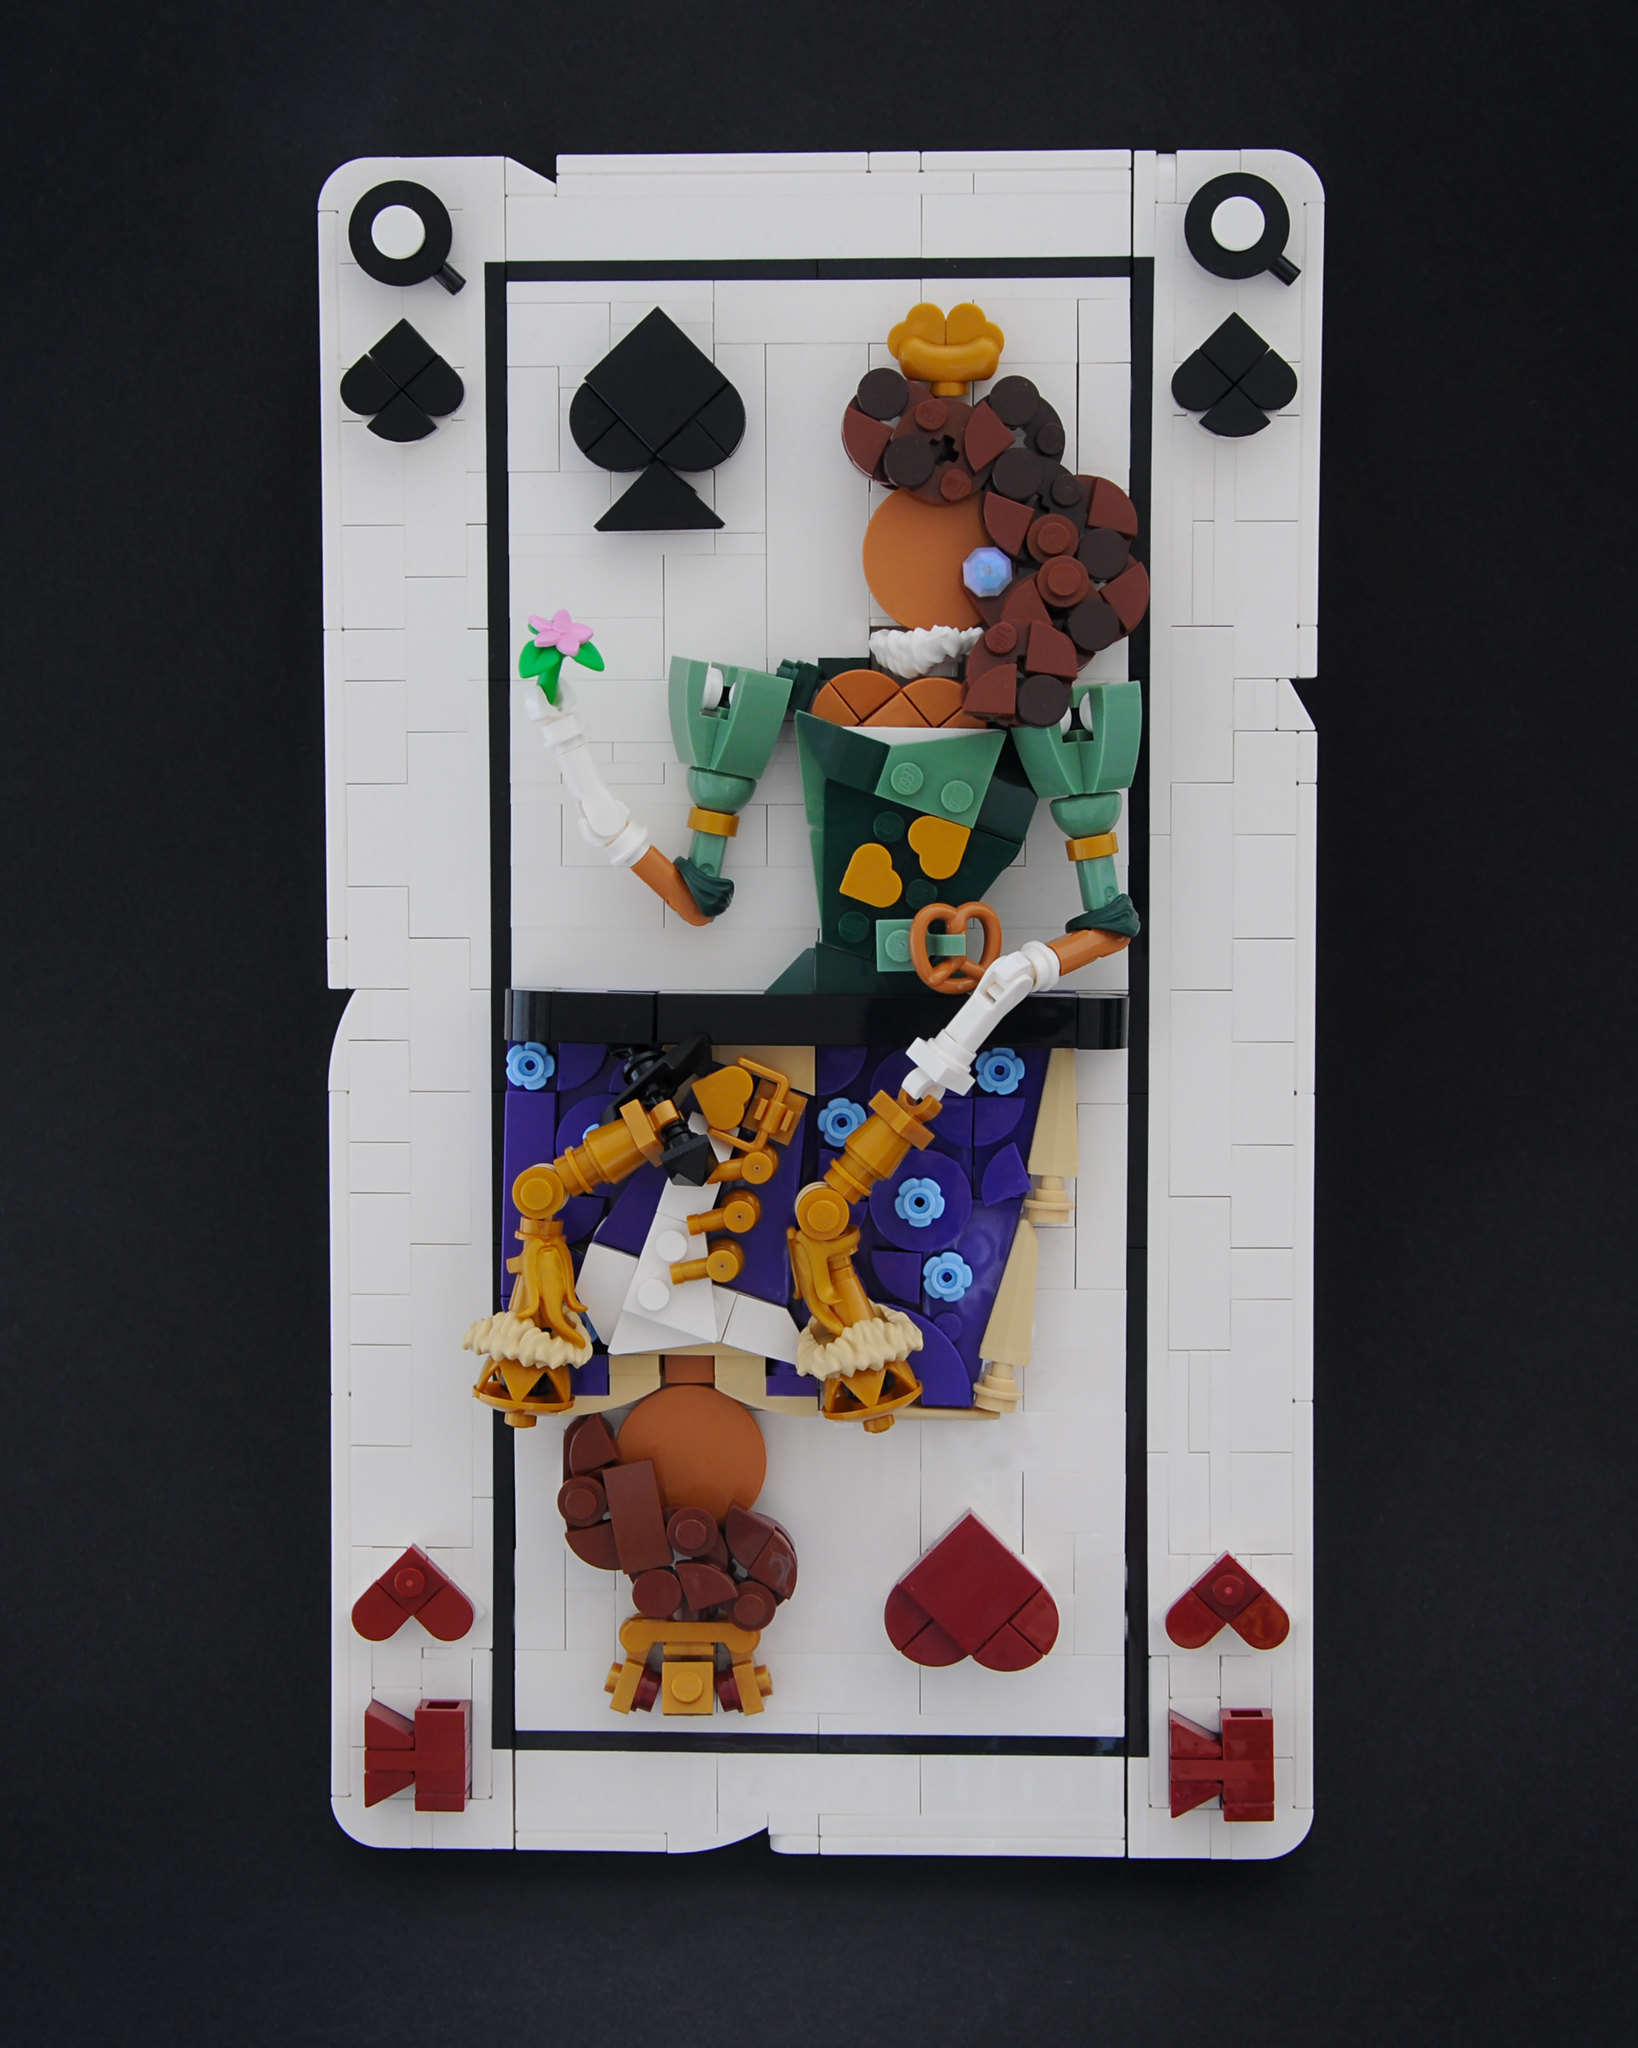 Queen of Spades / King of Hearts